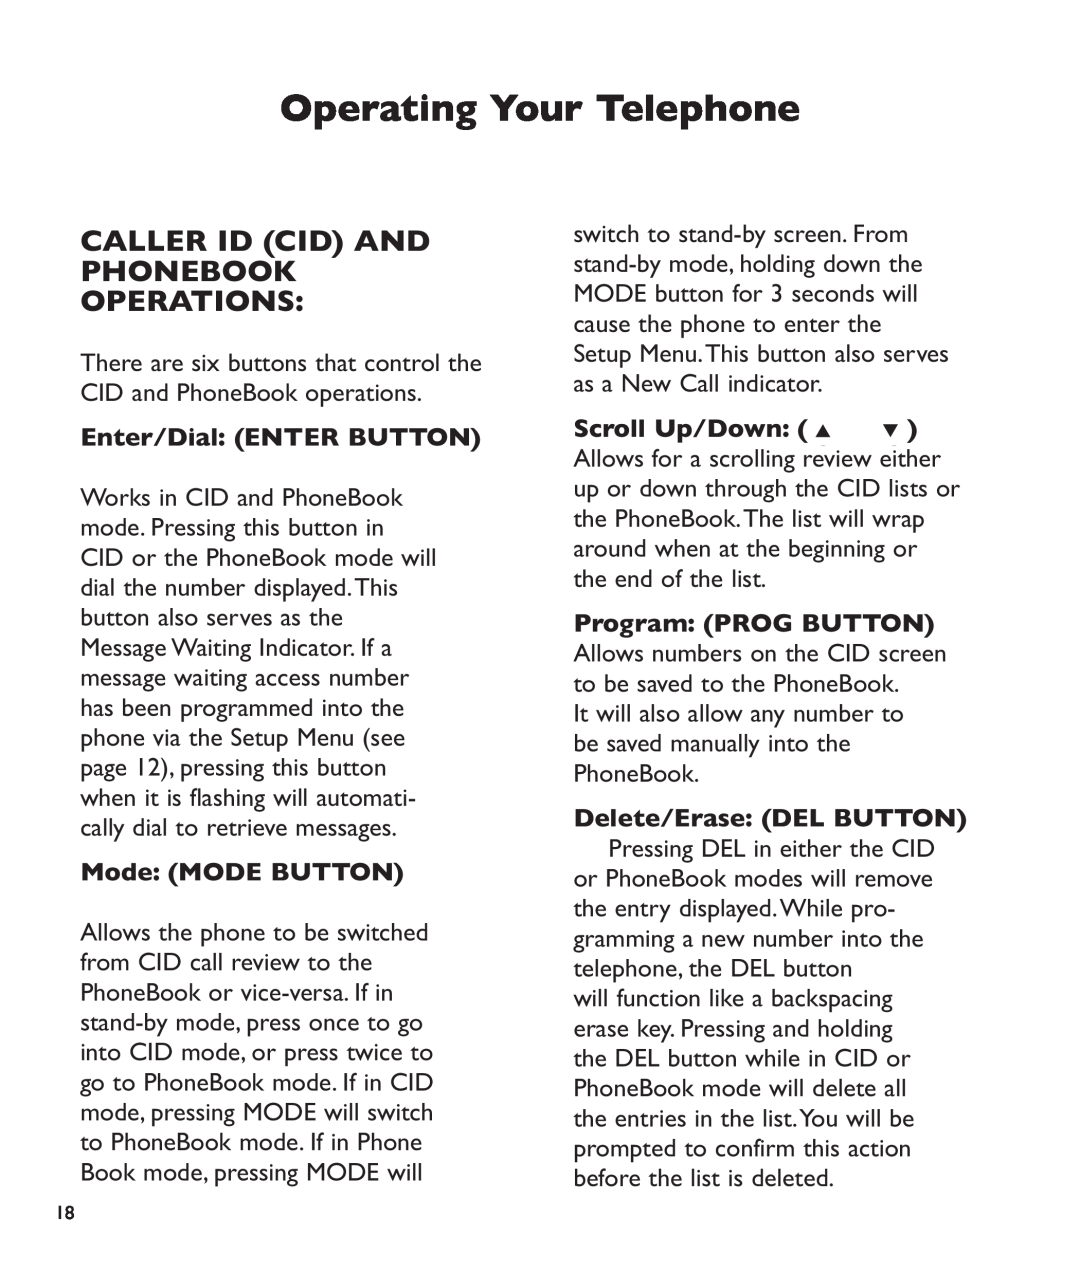 Clarity c2210 Caller Id Cid And Phonebook Operations, Enter/Dial ENTER BUTTON, Mode MODE BUTTON, Operating Your Telephone 